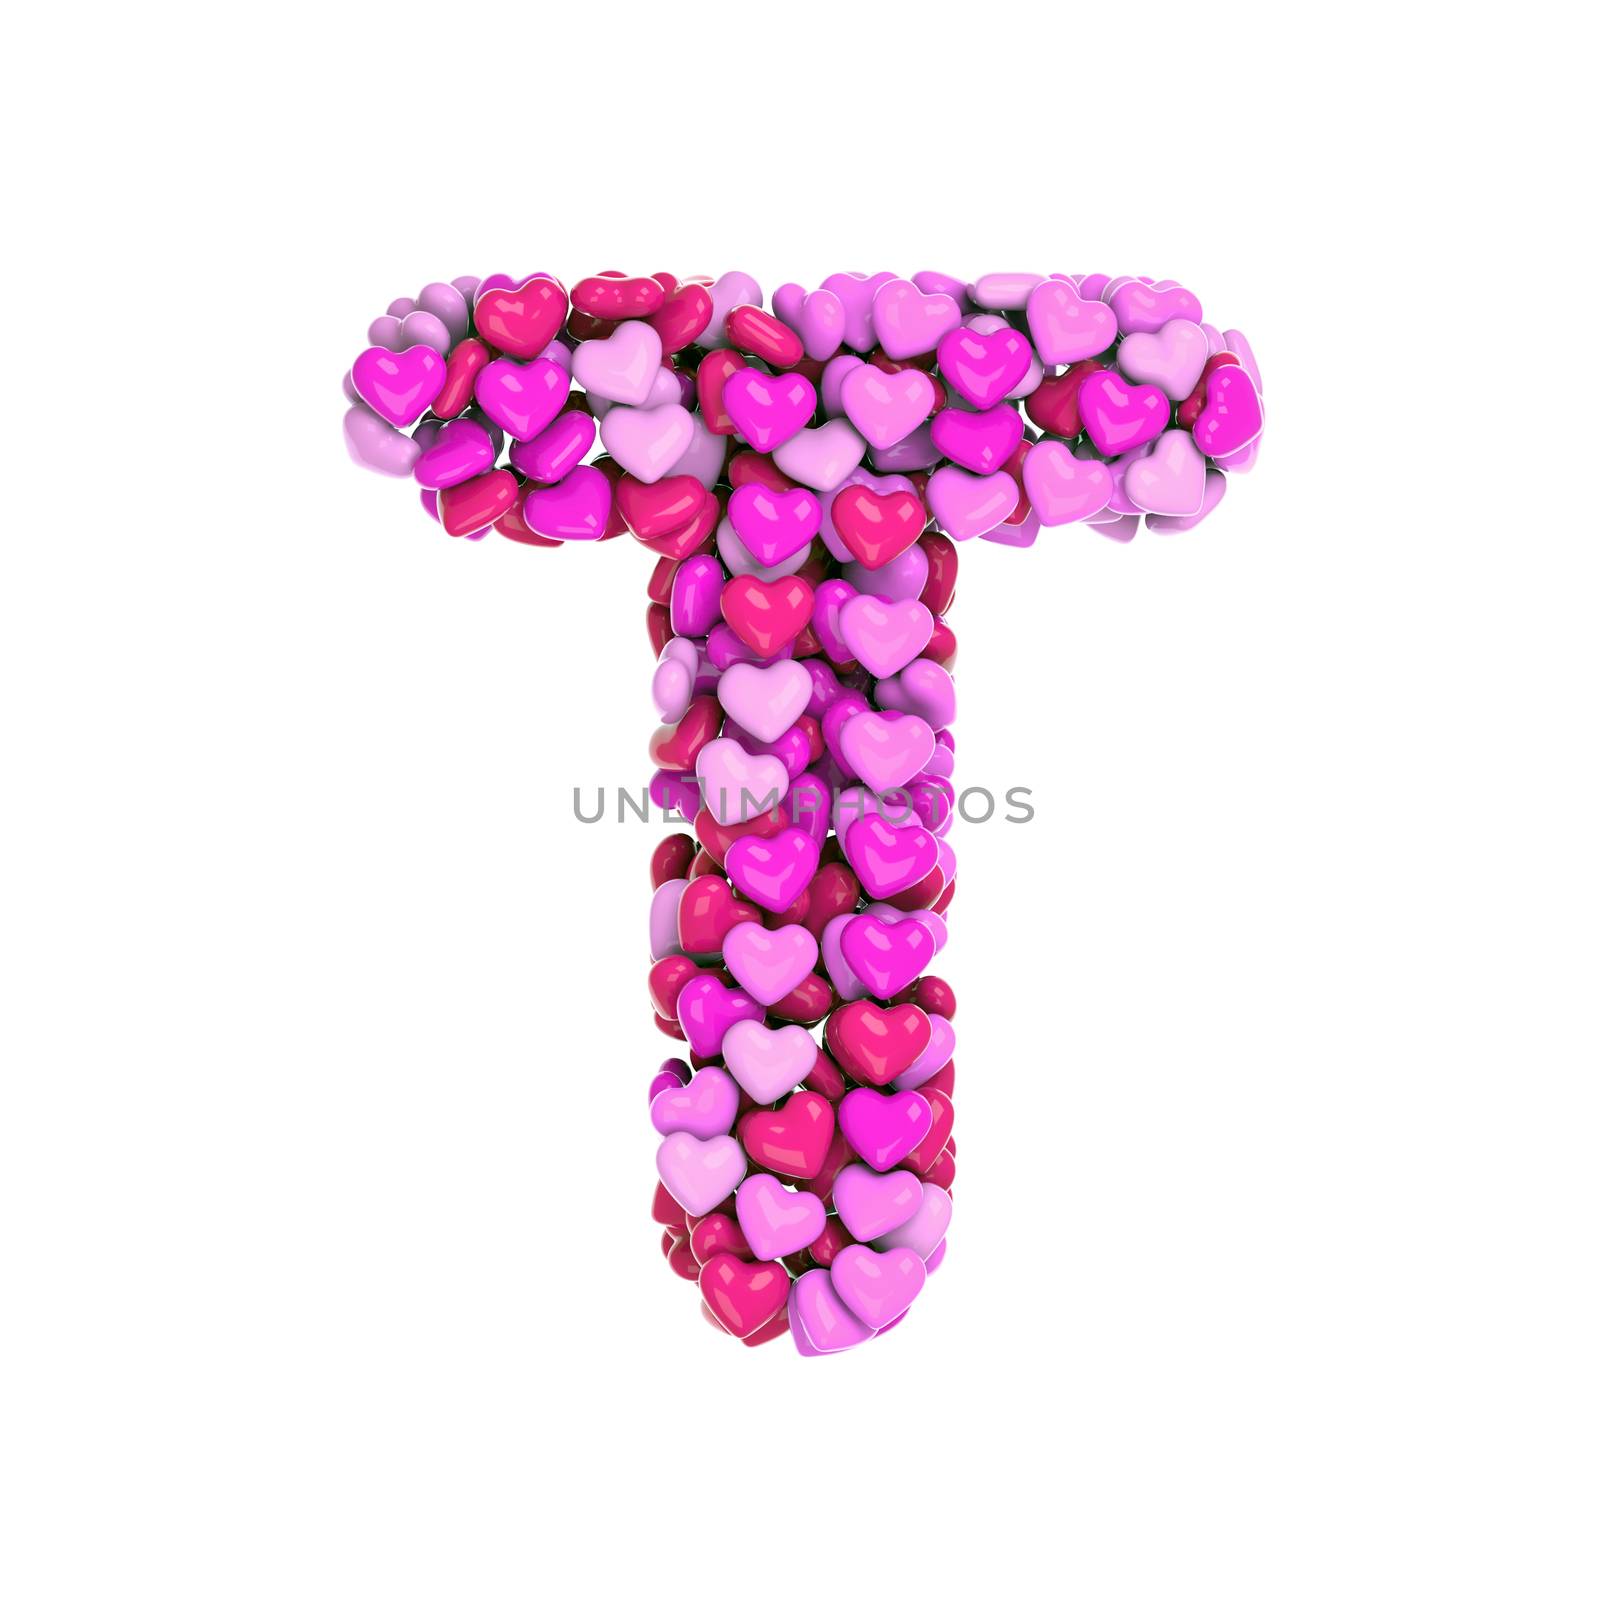 Valentine letter T - Uppercase 3d pink hearts font - Love, passion or wedding concept by chrisroll